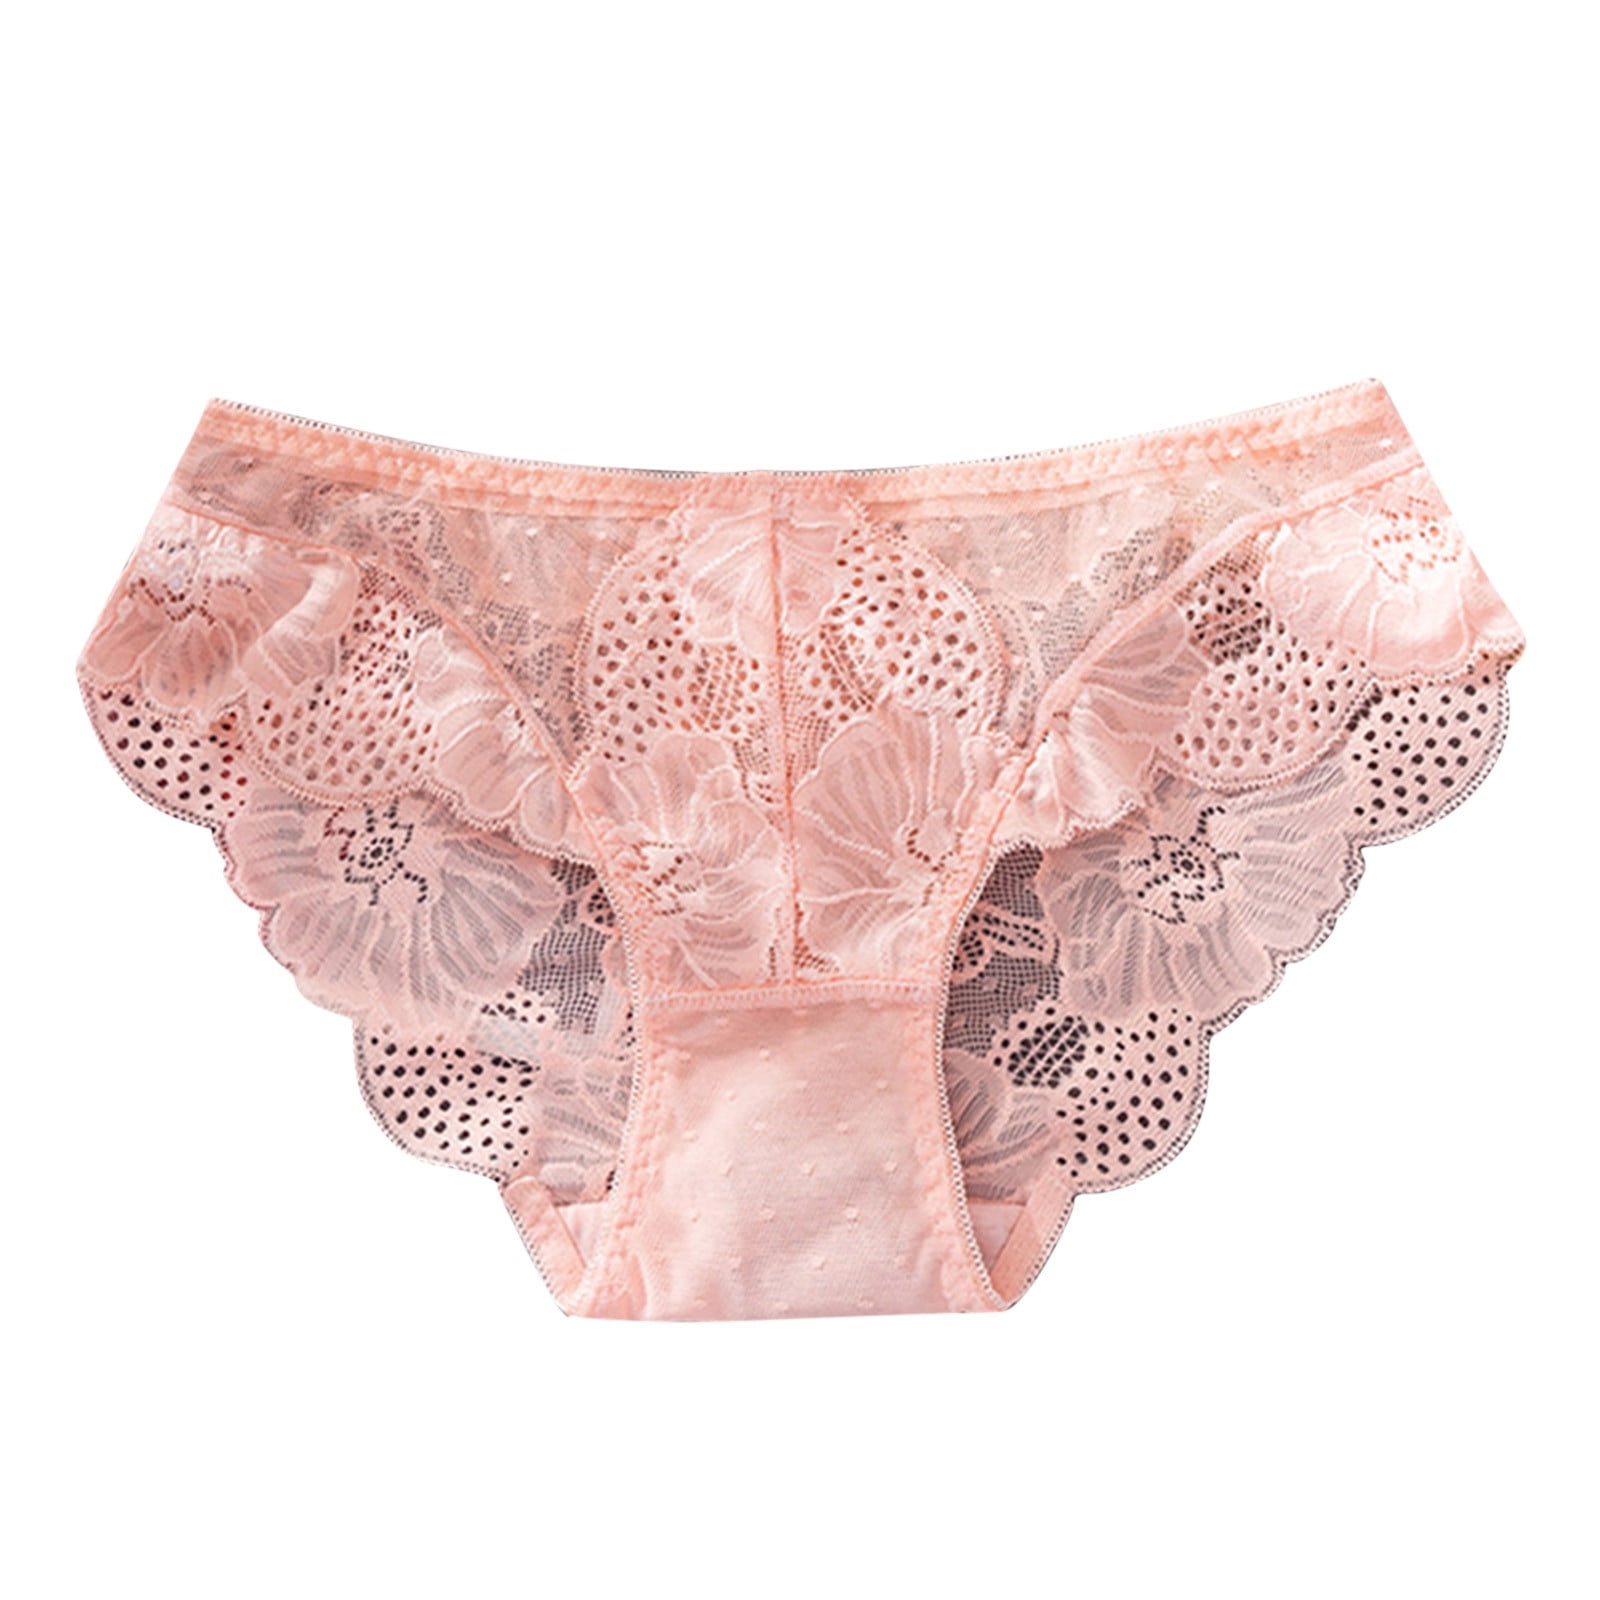 JDEFEG Nylon Granny Panties Women Lace Underwear Breathable Hipster Panties  Stretch Seamless Briefs Plus Size G String For Women 2Xl Lace Pink Xl 